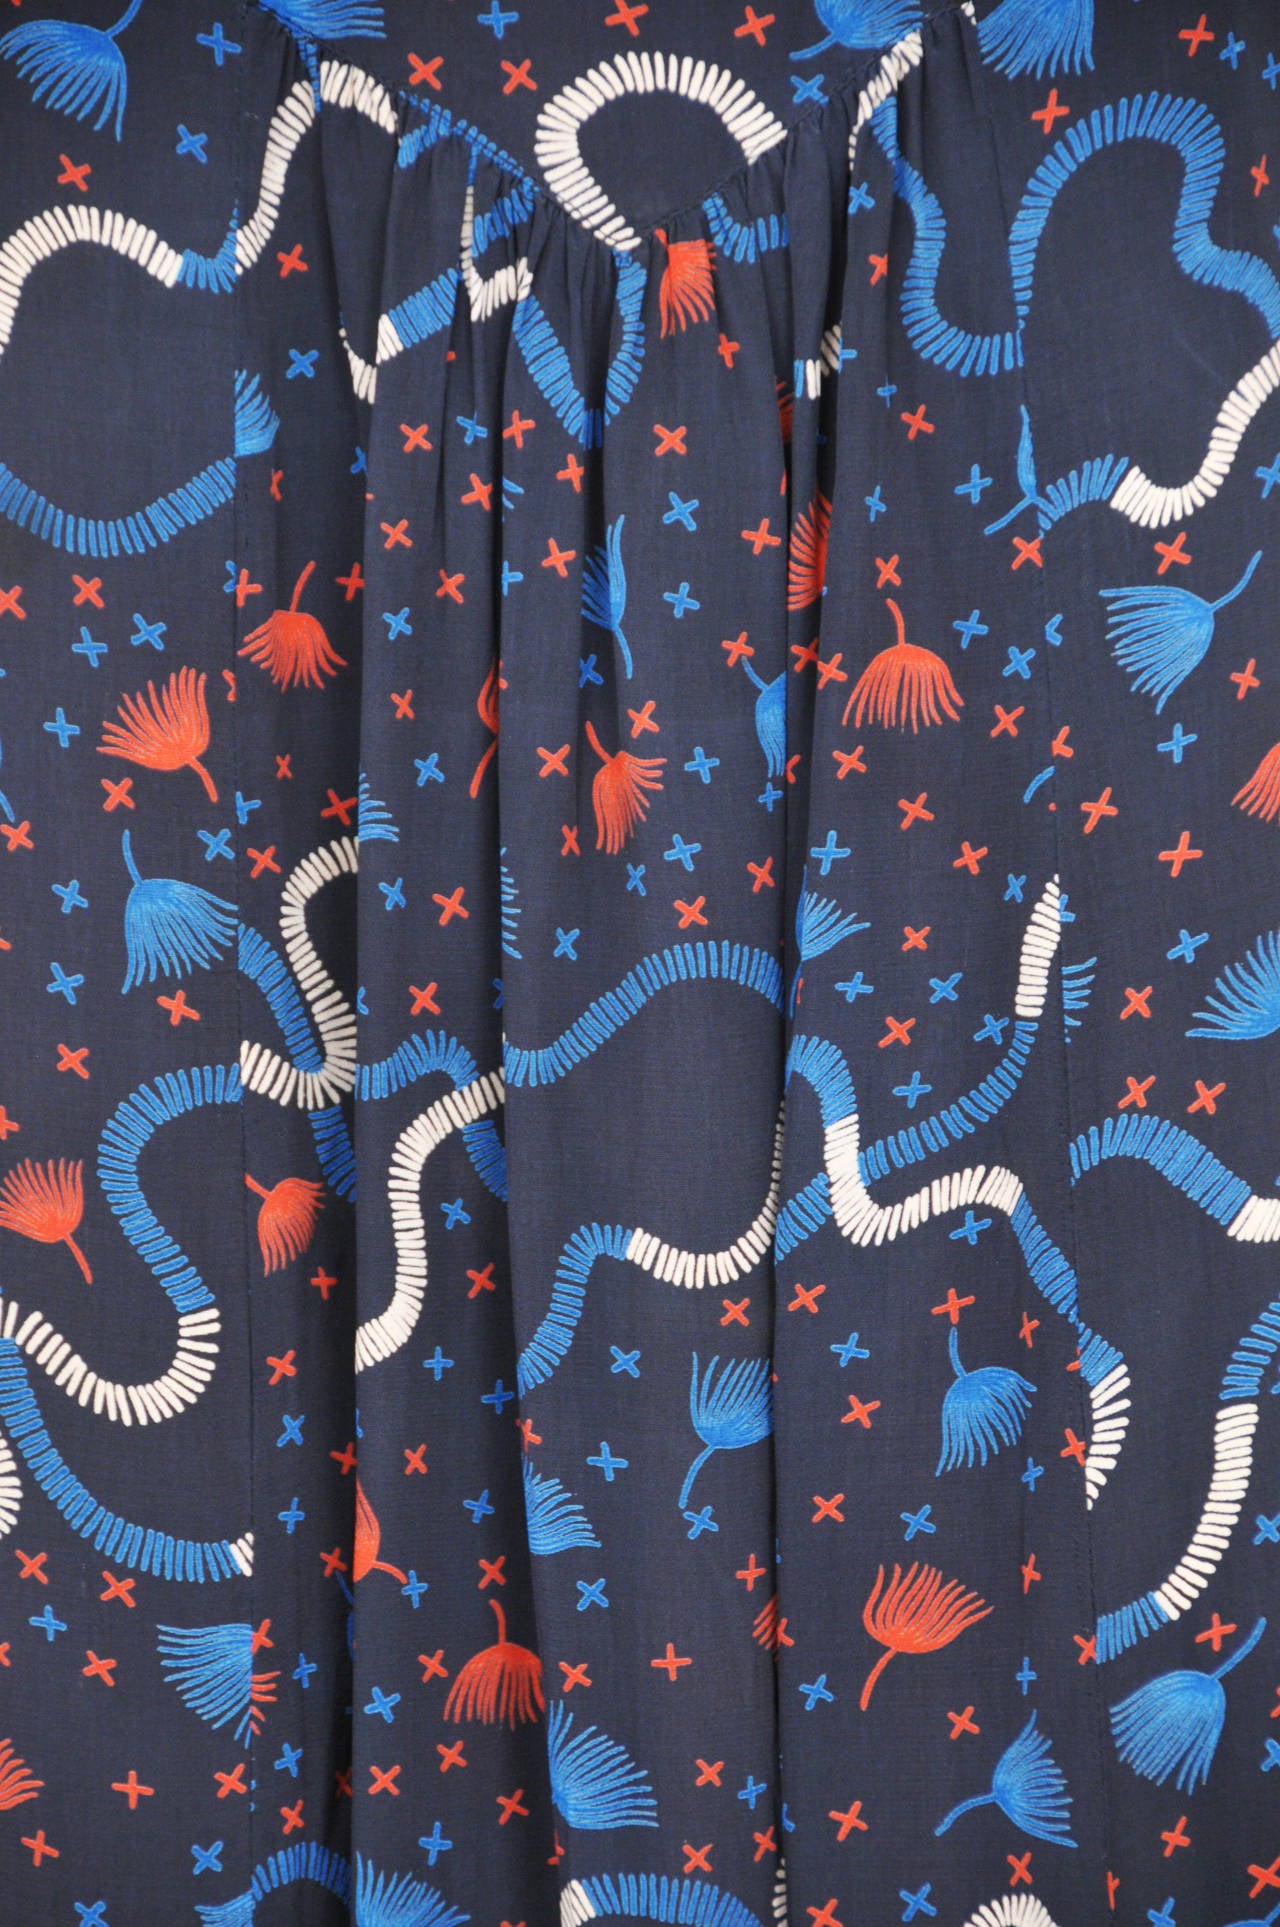 Vintage Ossie Clark navy blue printed rayon sleeveless maxi dress featuring the Celia Birtwell 